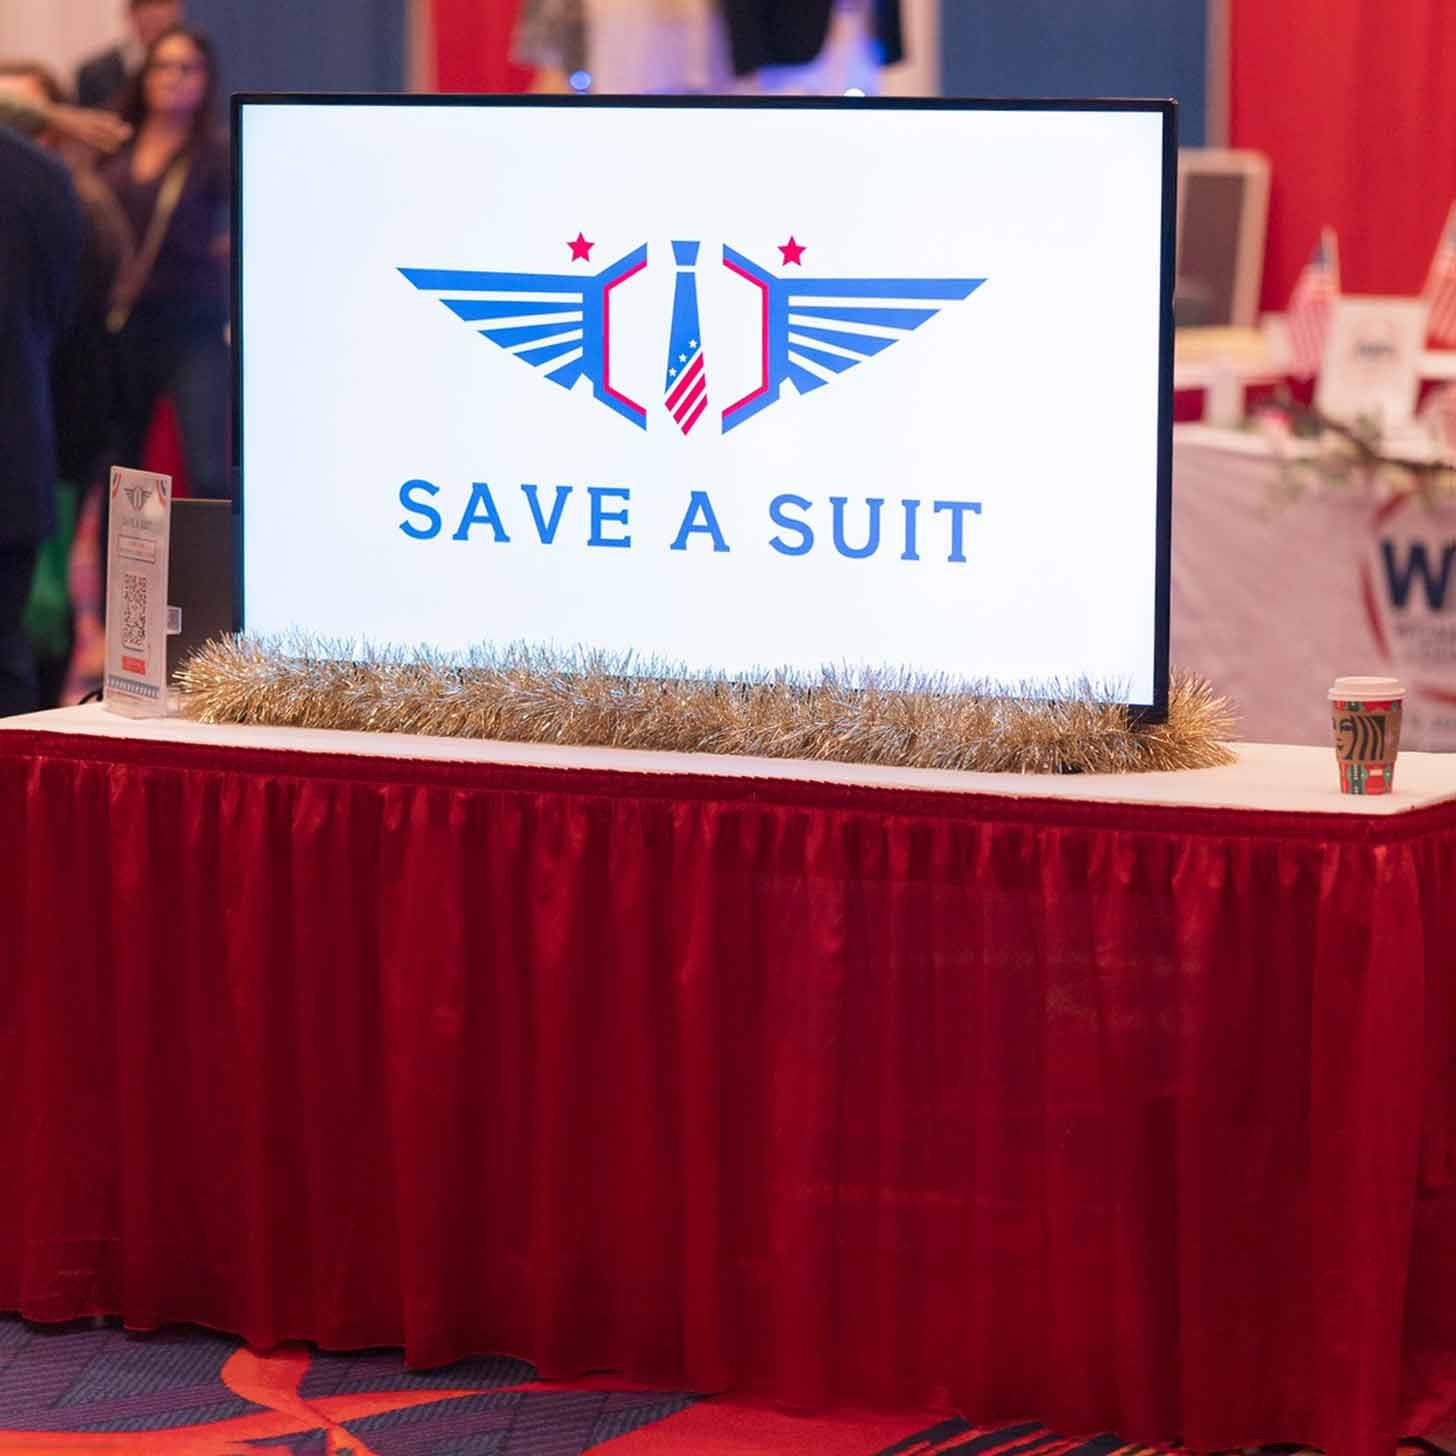 Veterans trying on professional clothes at a suiting event for Save a Suit